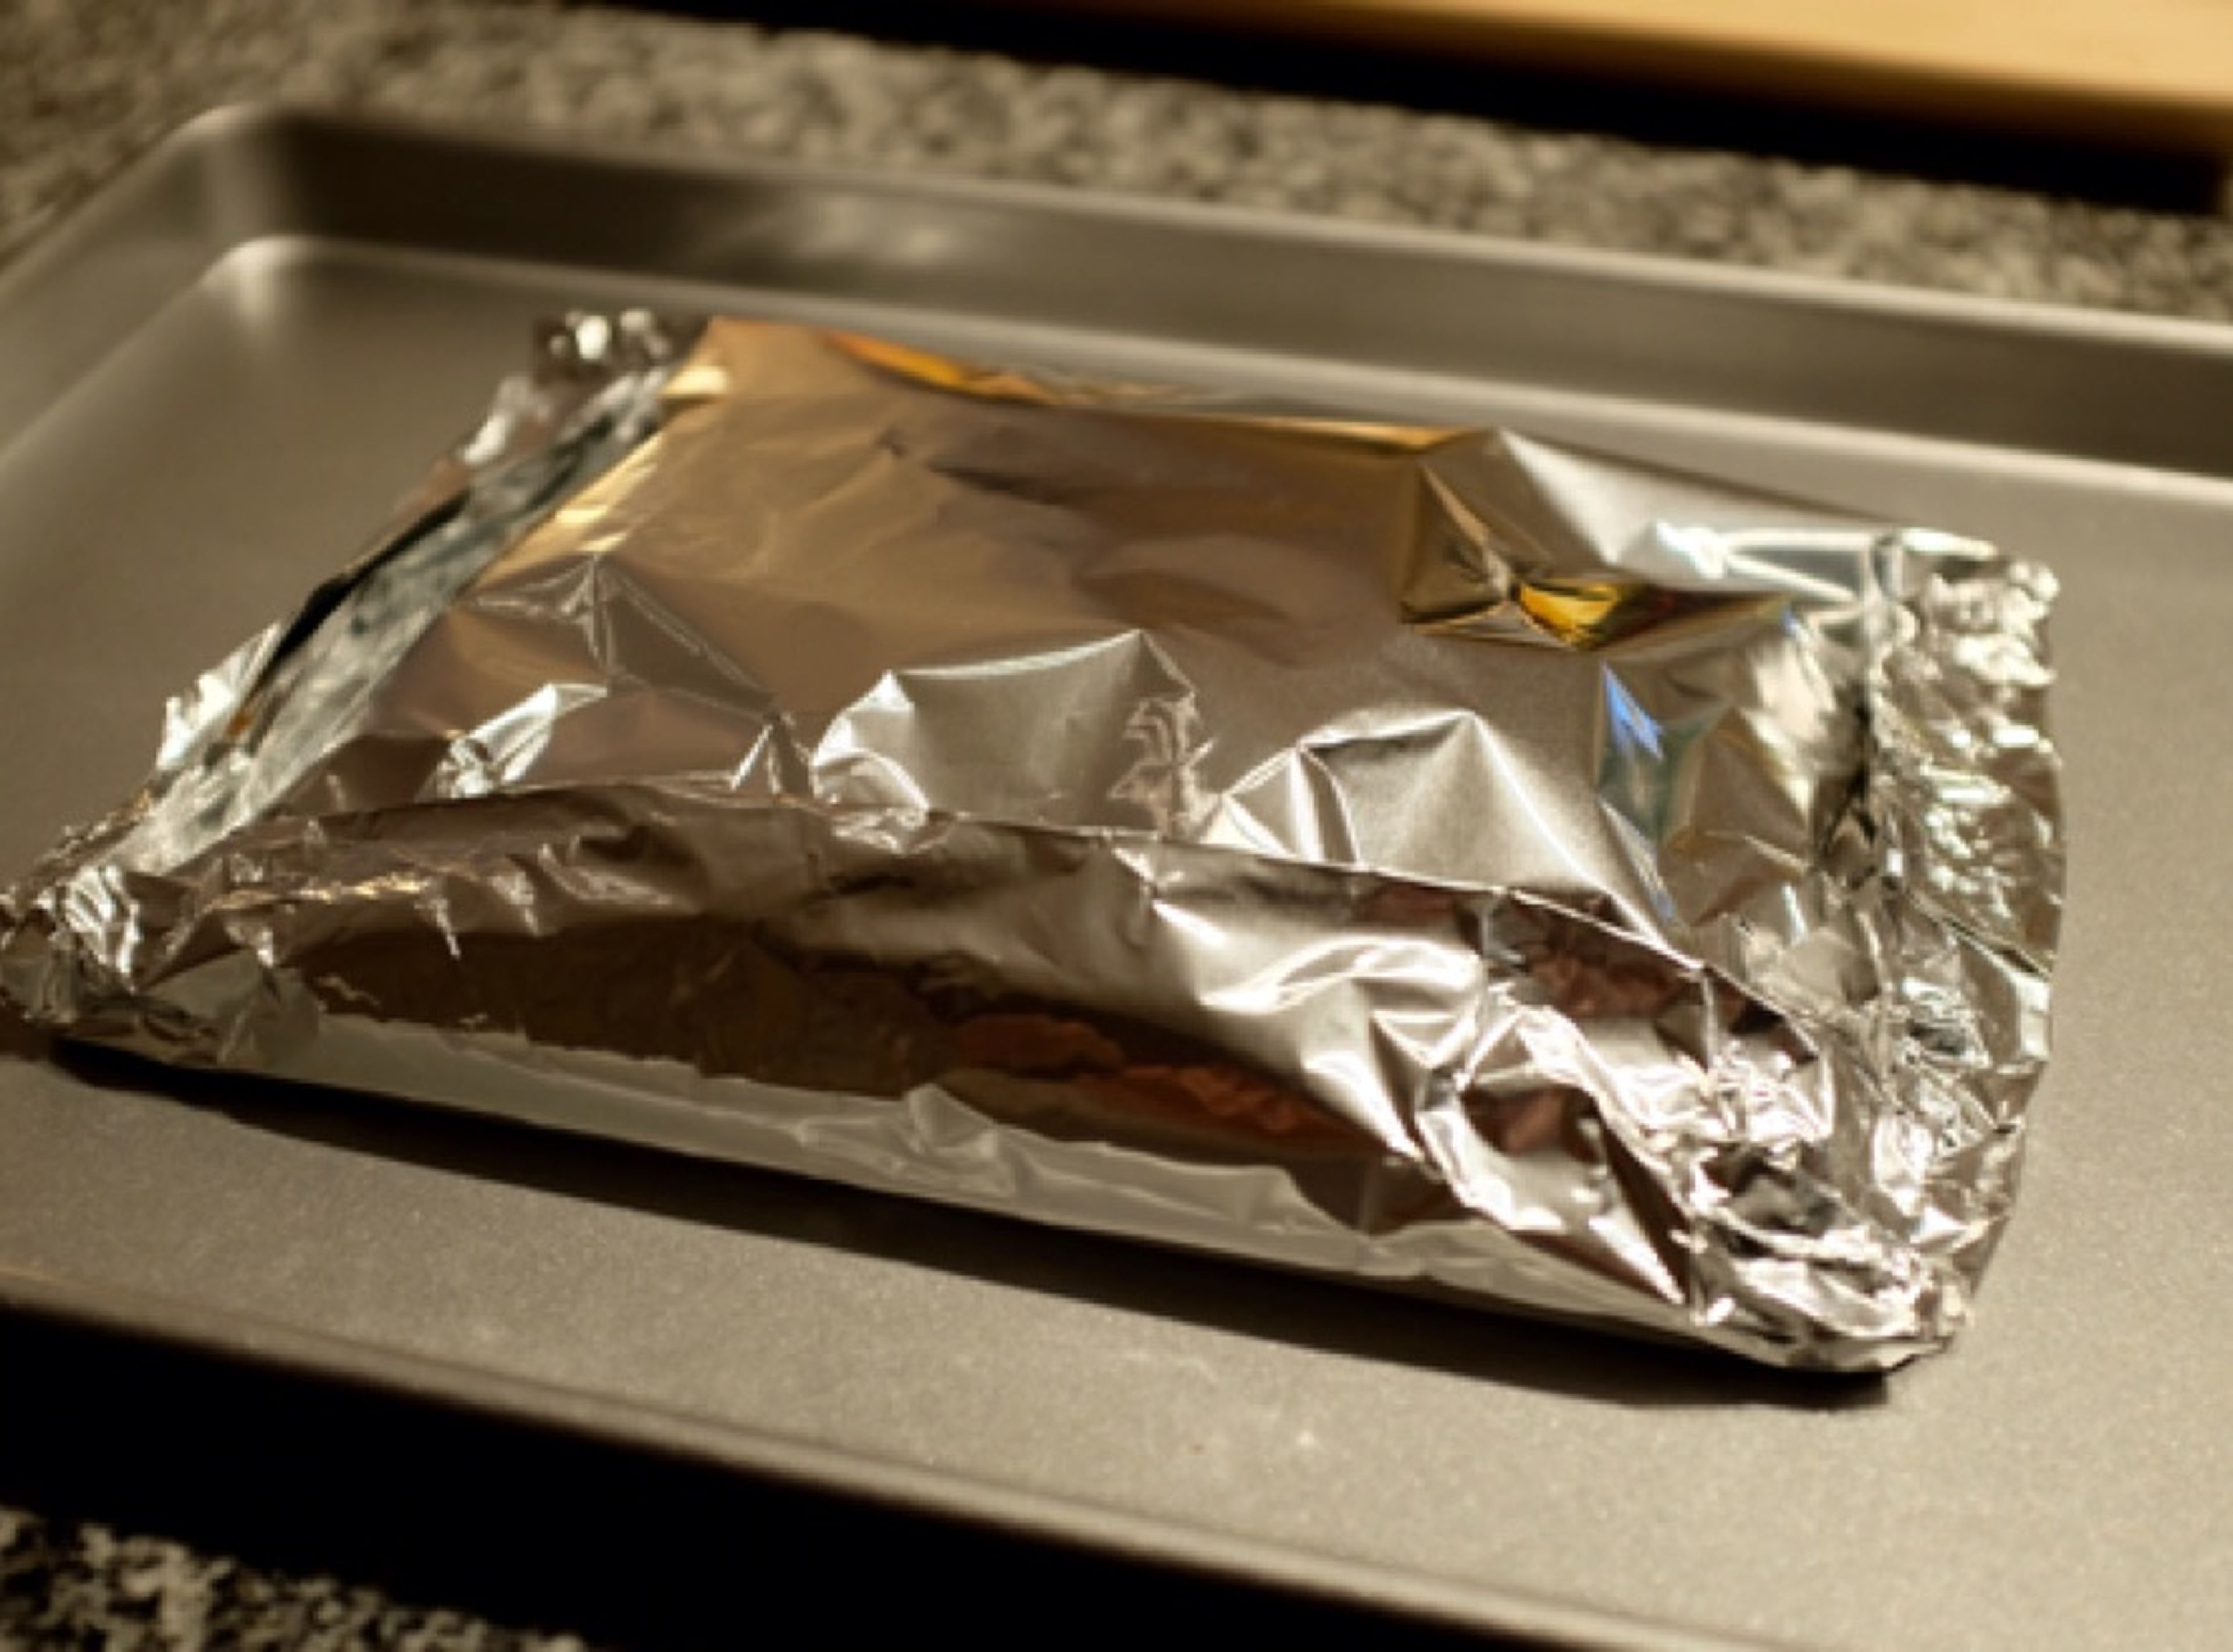 Place another sheet of aluminum foil on top. Fold up the edges of the aluminum foil to create a package and seal the edges well. Transfer baking sheet to oven and bake for approx. 25 min. at 175°C/350°F.